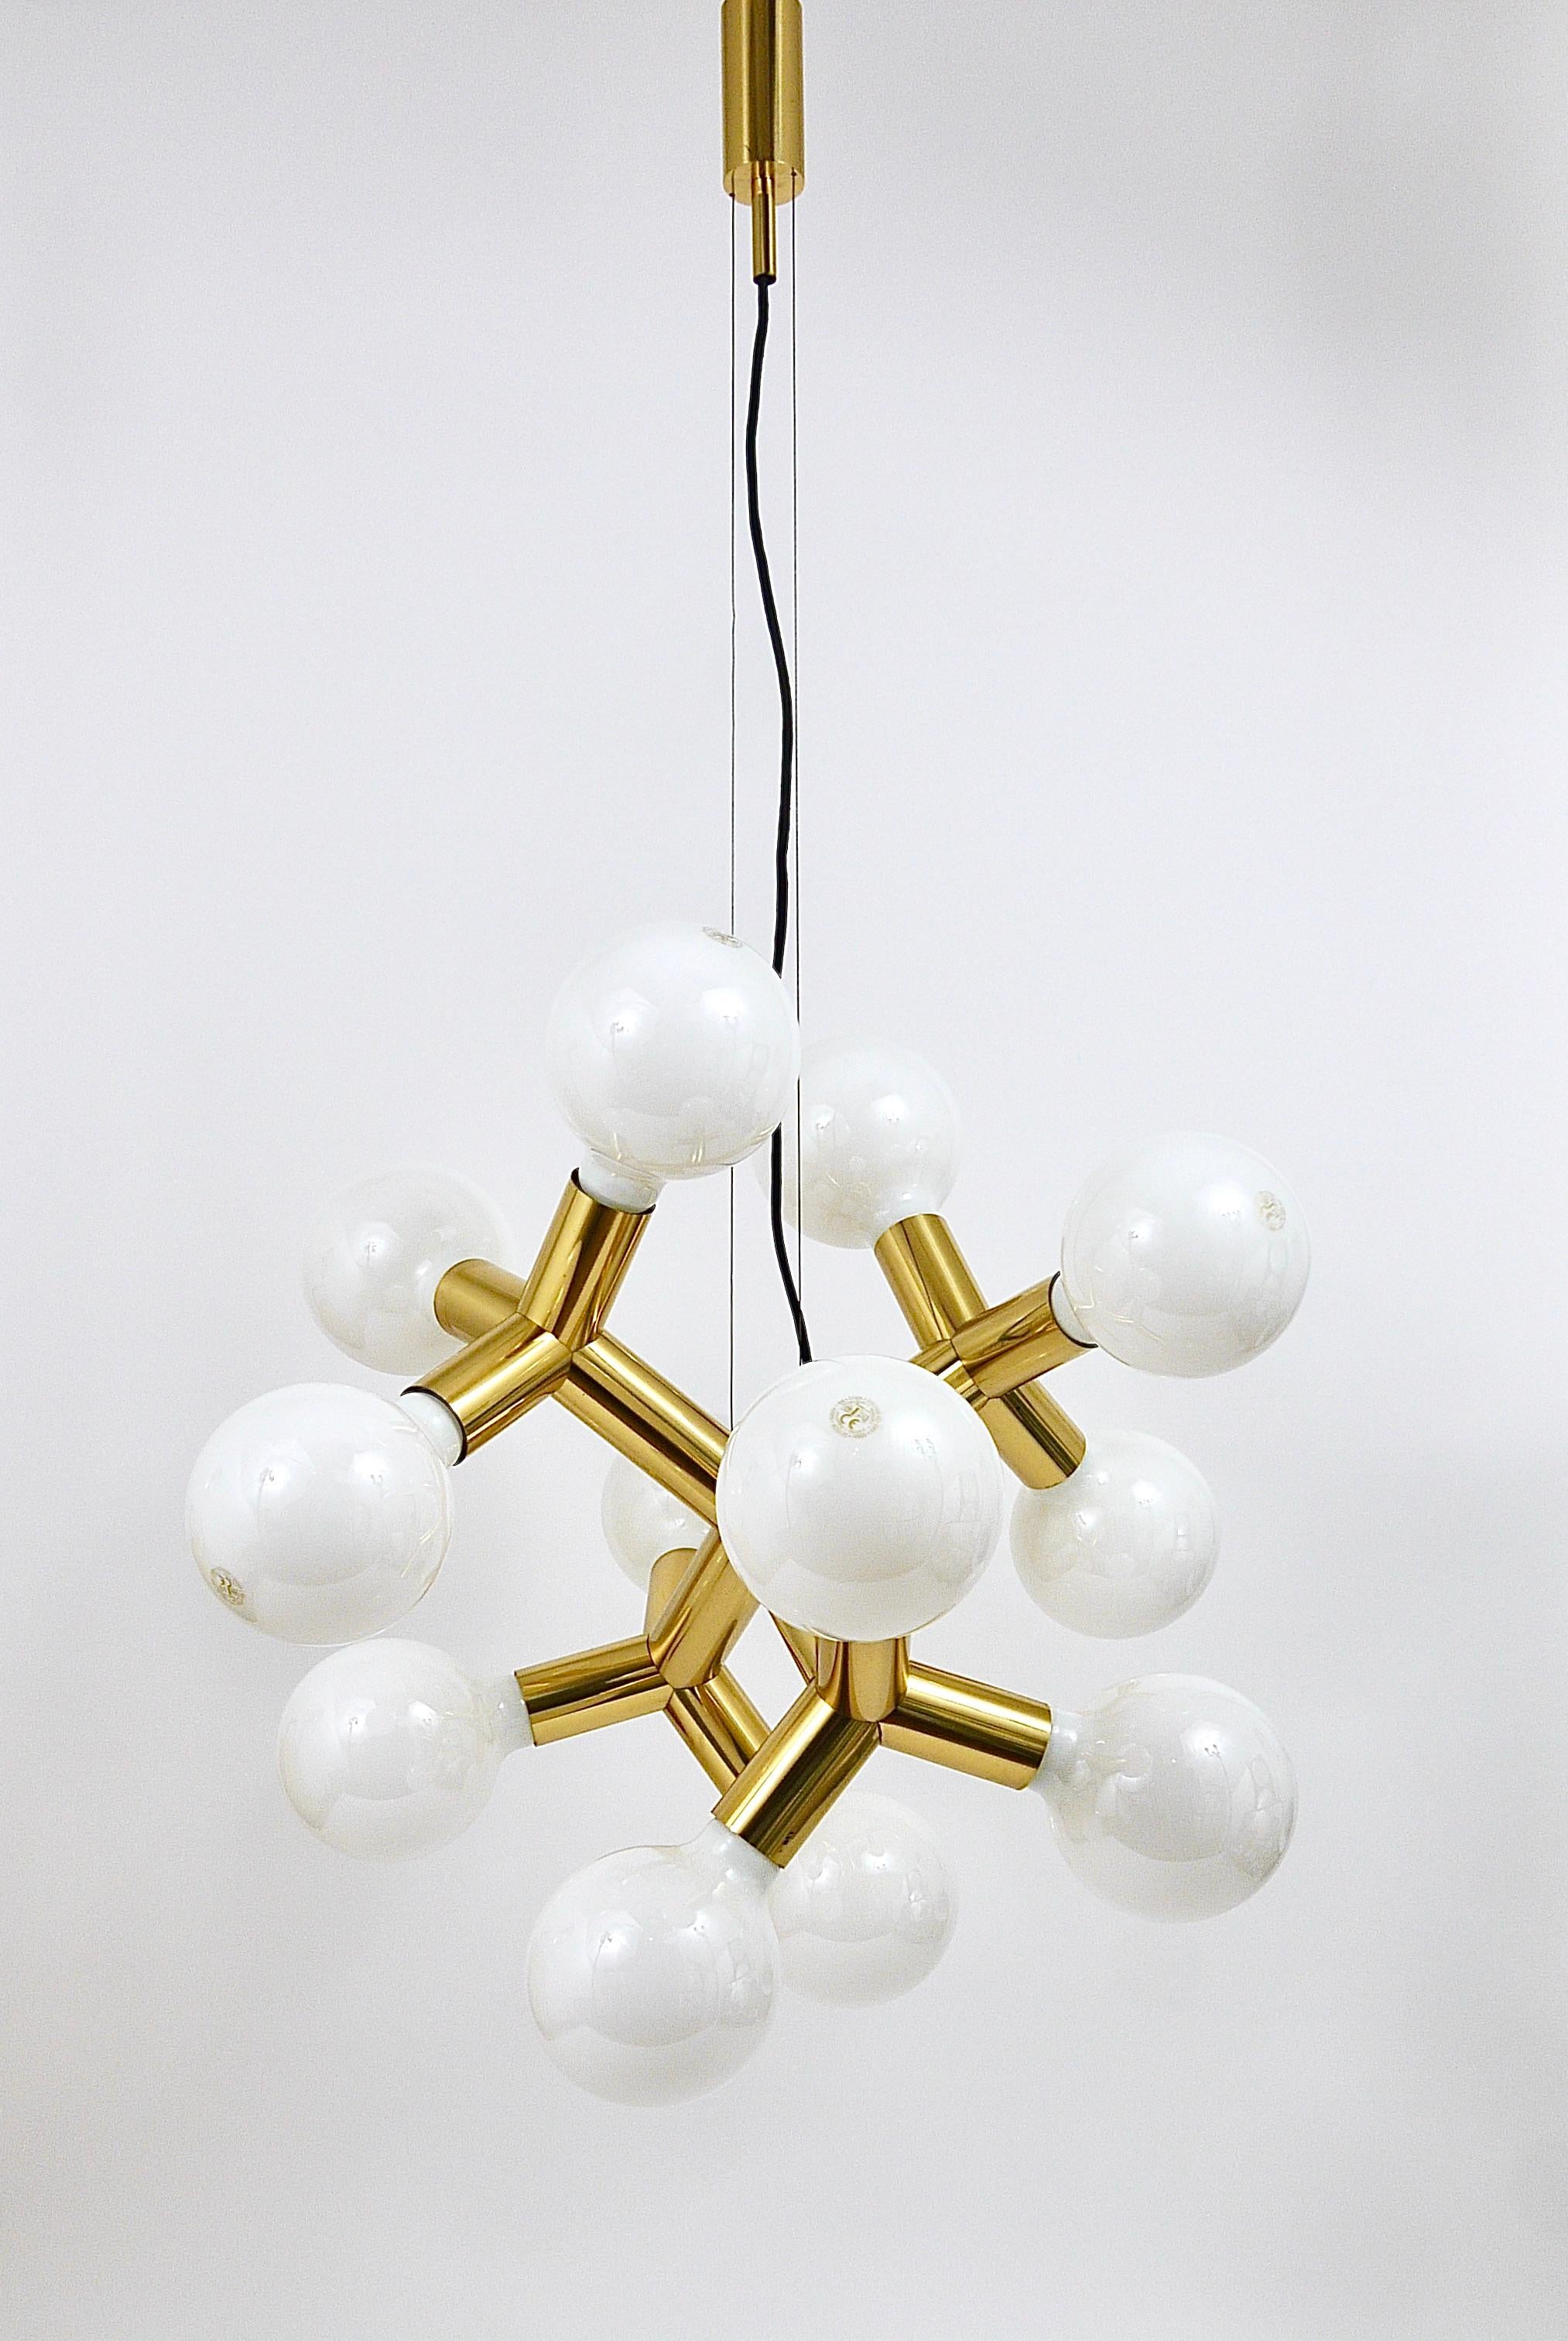 A stunning Midcentury sputnik pendant light from the late 1960s, designed and executed by Kalmar Austria. An impressive piece, made of brass, in very good condition. This sculptural chandelier offers 12 light sources and looks great from all angles